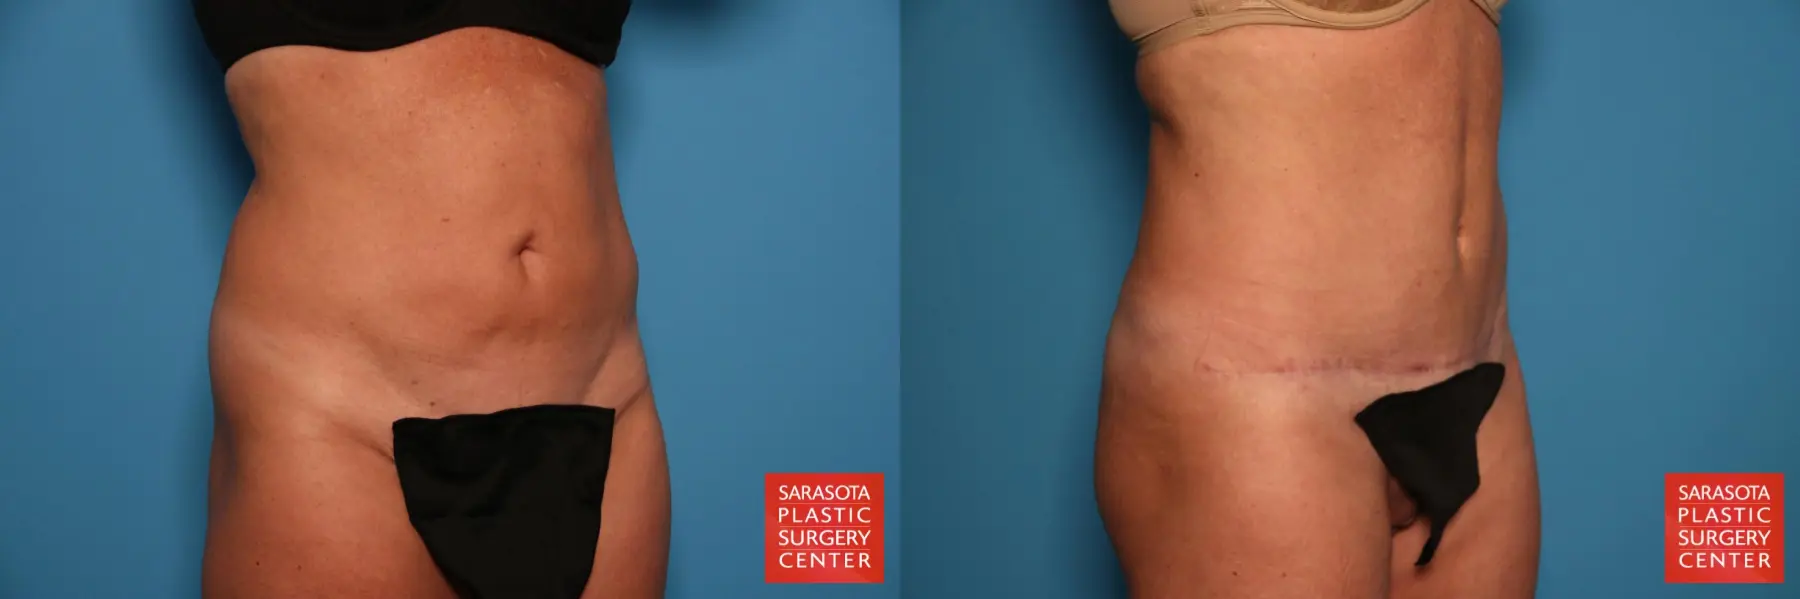 Tummy Tuck: Patient 10 - Before and After 2